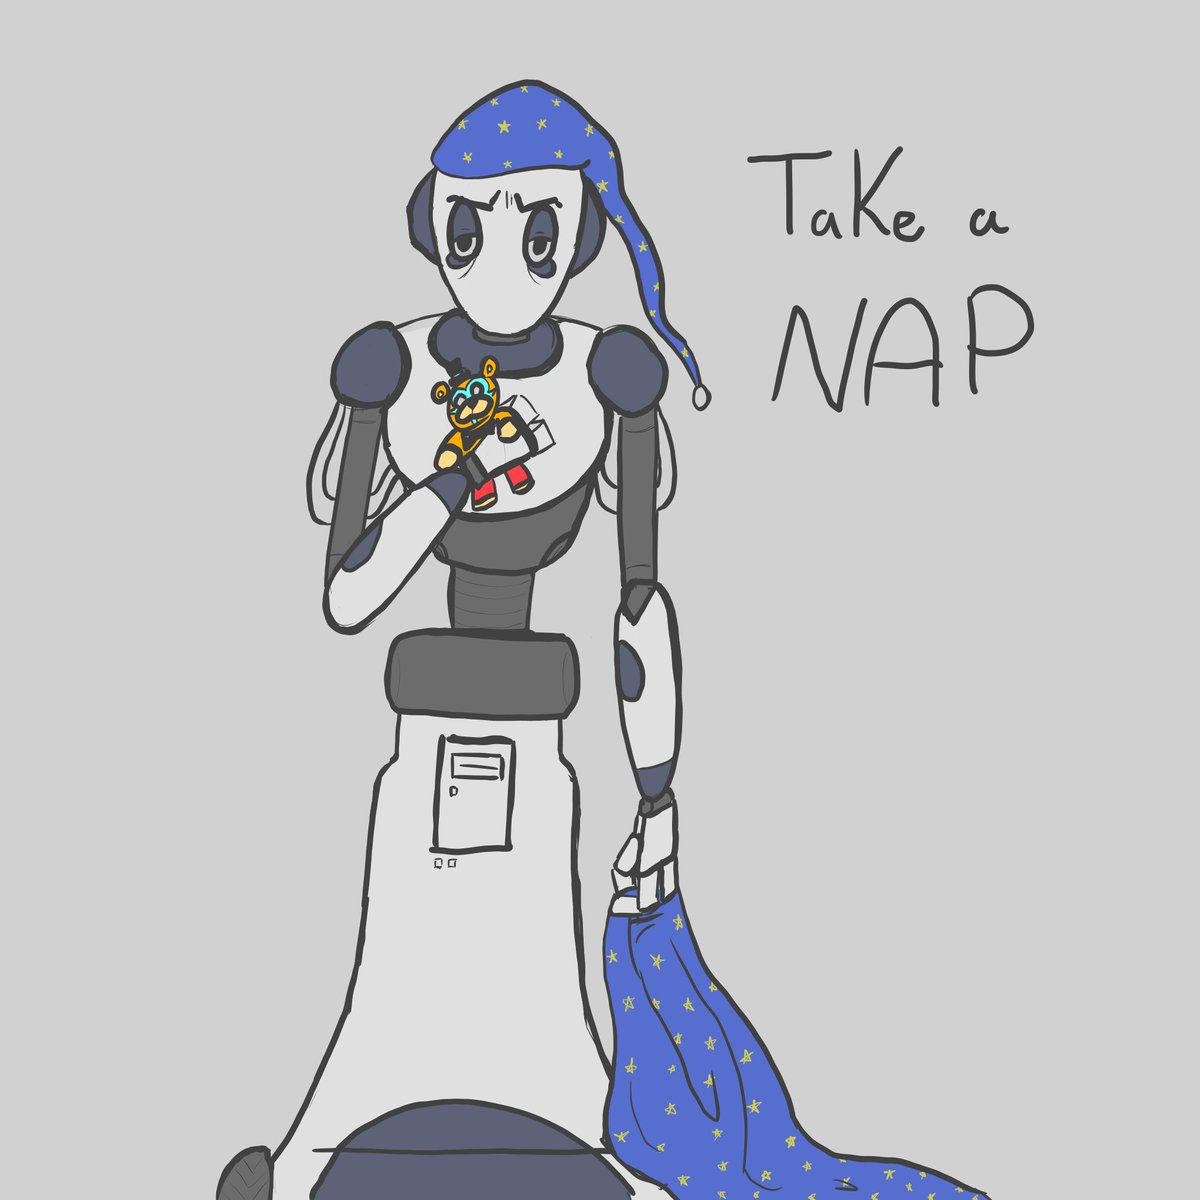 I present to you: Nap Bot. He's too tired for your shit just go to sleep

Post your own staff bots if you wanna

#fnafsecuritybreach #fnaf #FNAFRuin #fnaf9 #fnafsb #fnafart #fnaffanart